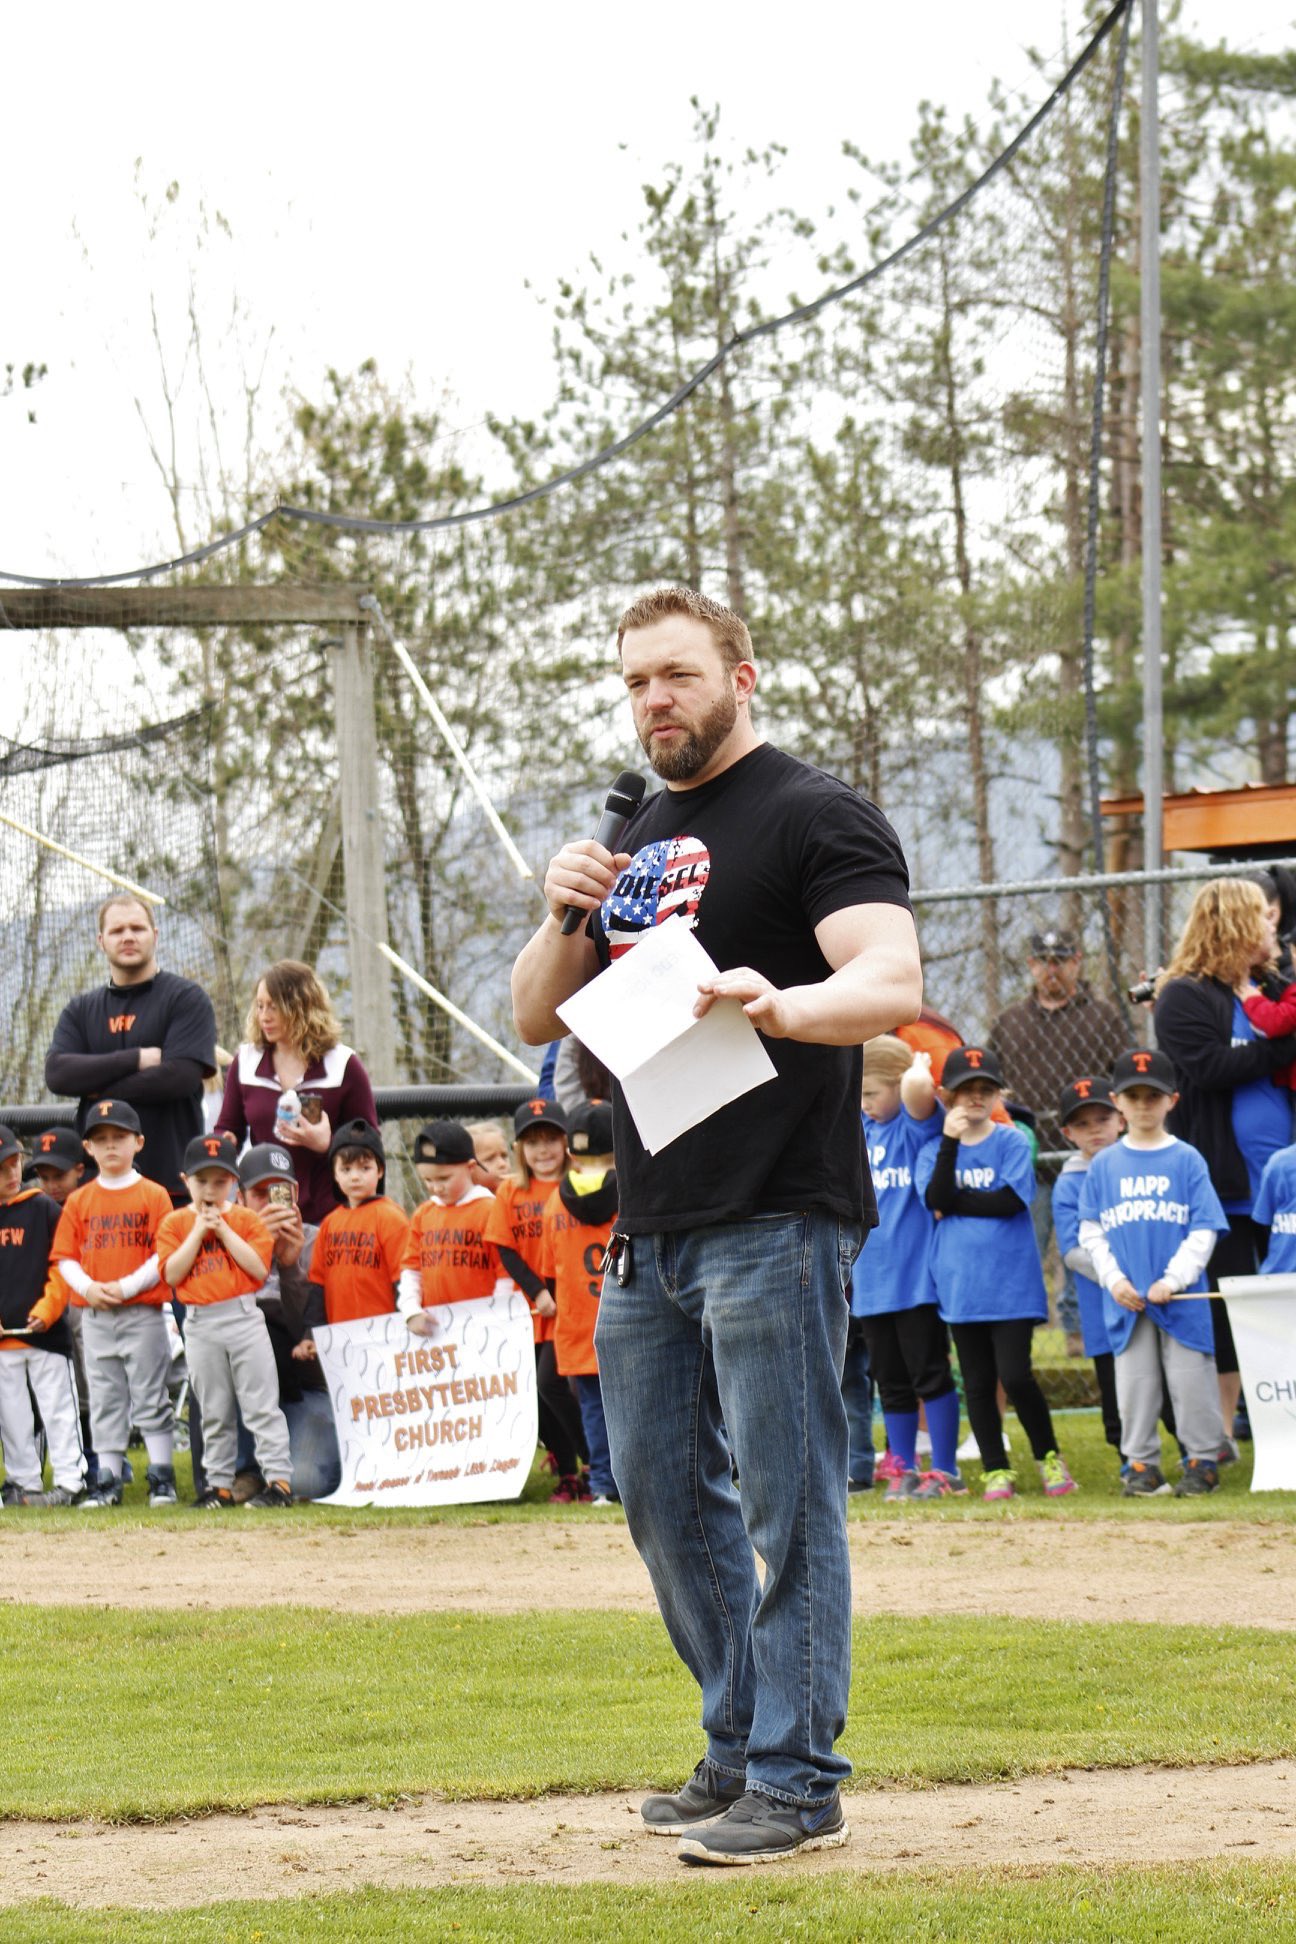 lejr fyrværkeri Faldgruber Towanda Little League on X: "GUESS WHO is the MC for Opening Day of Towanda  Little League? JEDD JOHNSON!! (Rumor has it that he can bend a nail with  his Grip Strength)!